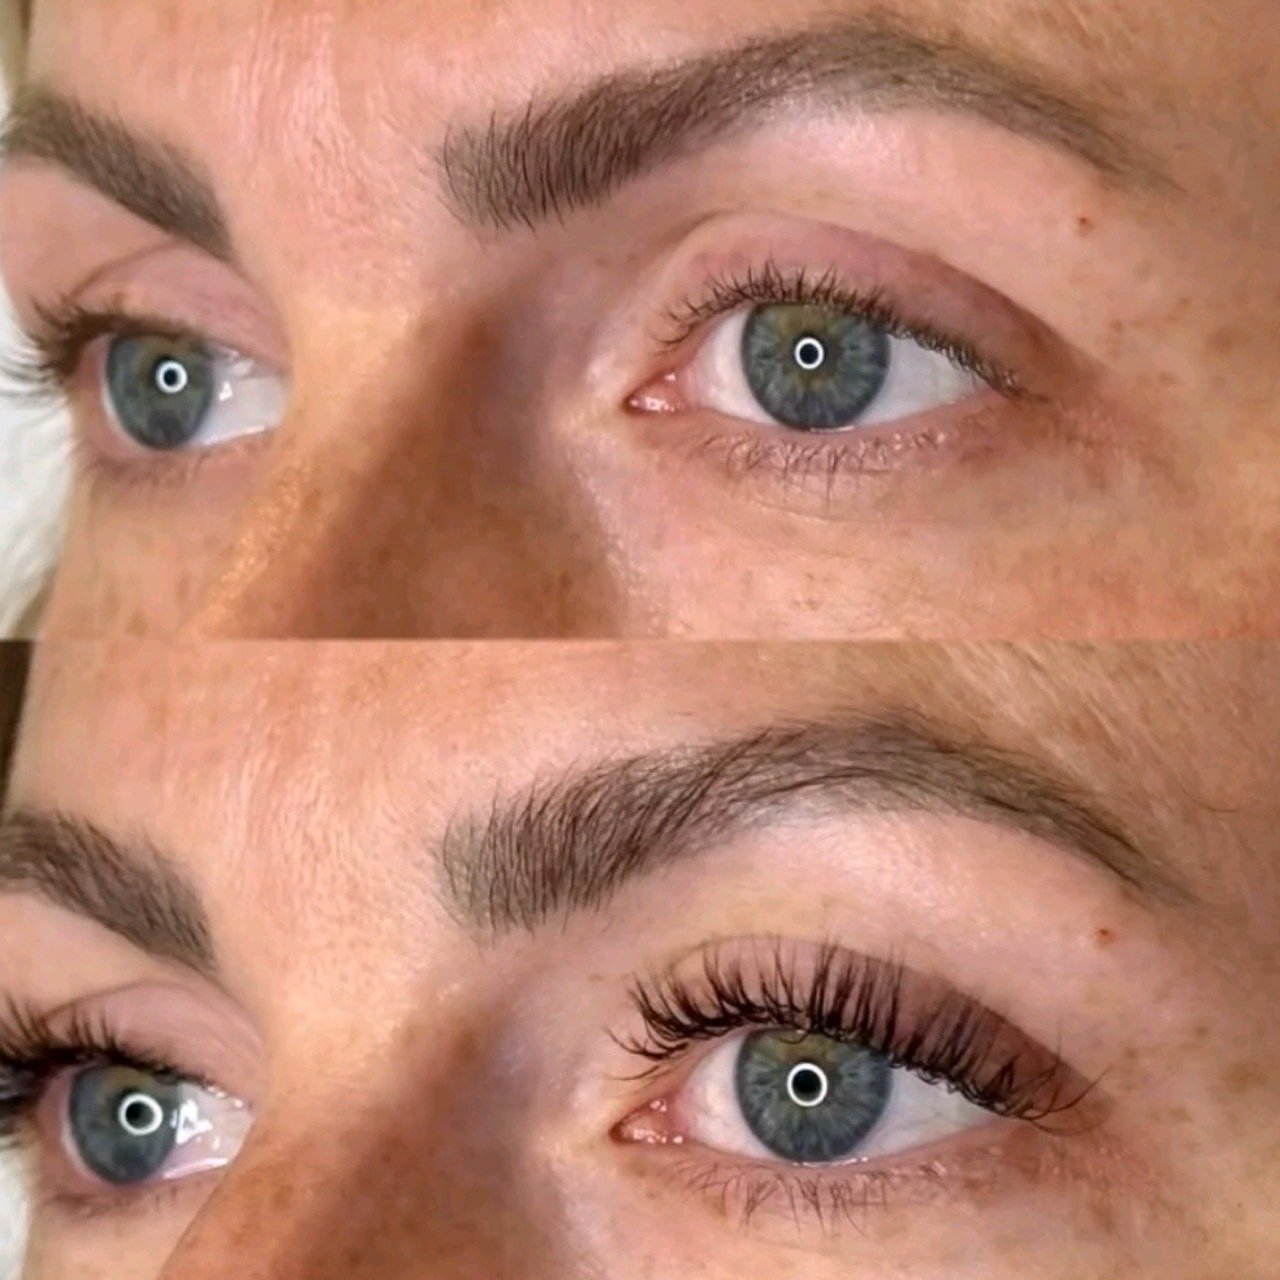 Peep this stunning lash transformation! Kass worked her magic, blending black and brown lashes for that perfect, natural vibe. Get ready to bat those lashes and slay the day, beauty!

Artist: Kass
Service: Custom Lash Extensions

#LashGoals #Effortle